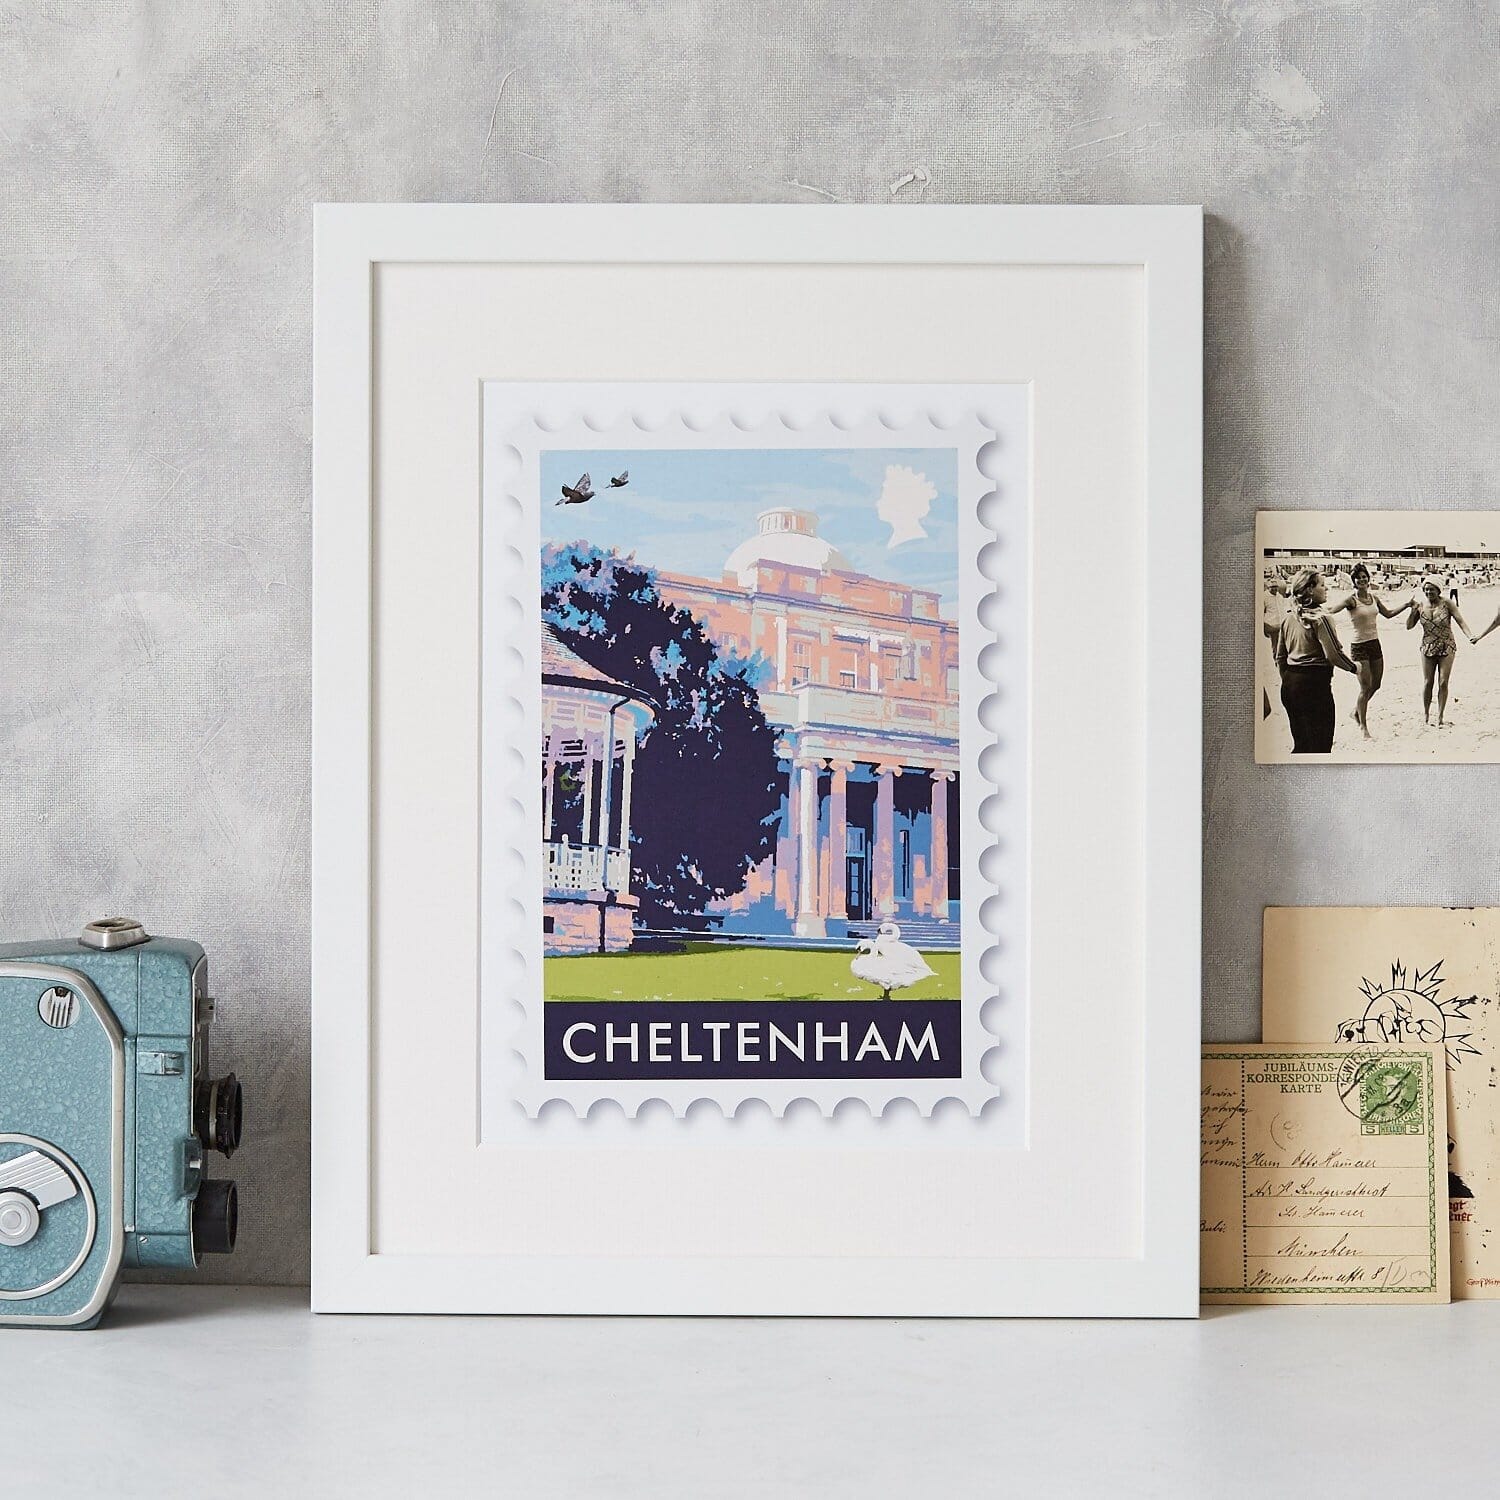 Print of the Pitville Pump Rooms in Cheltenham  in the style of a postage stamp